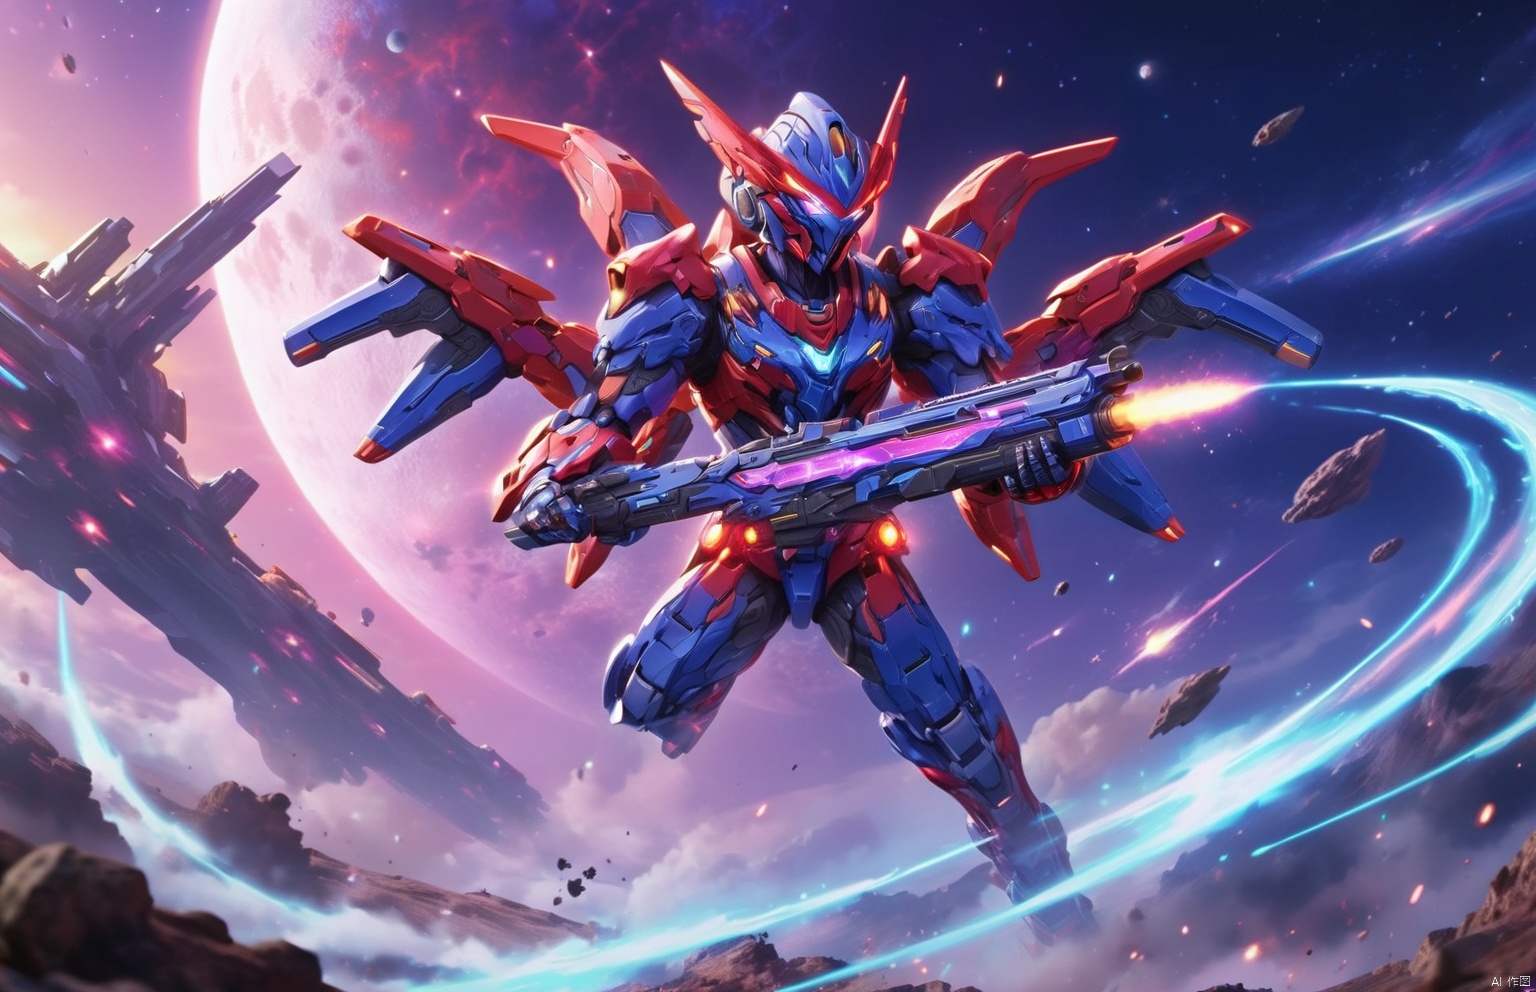  (Blue and red Mechs, purple glowing weapons in their hands, ready for battle),masterpiece, extremely detailed, insanely detailed, realistic, full screen, wielding a futuristic assault rifle, male focus, sky, no humans, glowing, moon, sky, science fiction, space, planet, earth , planet, tokusatsu, ultraman, Planetary apocalypse scene